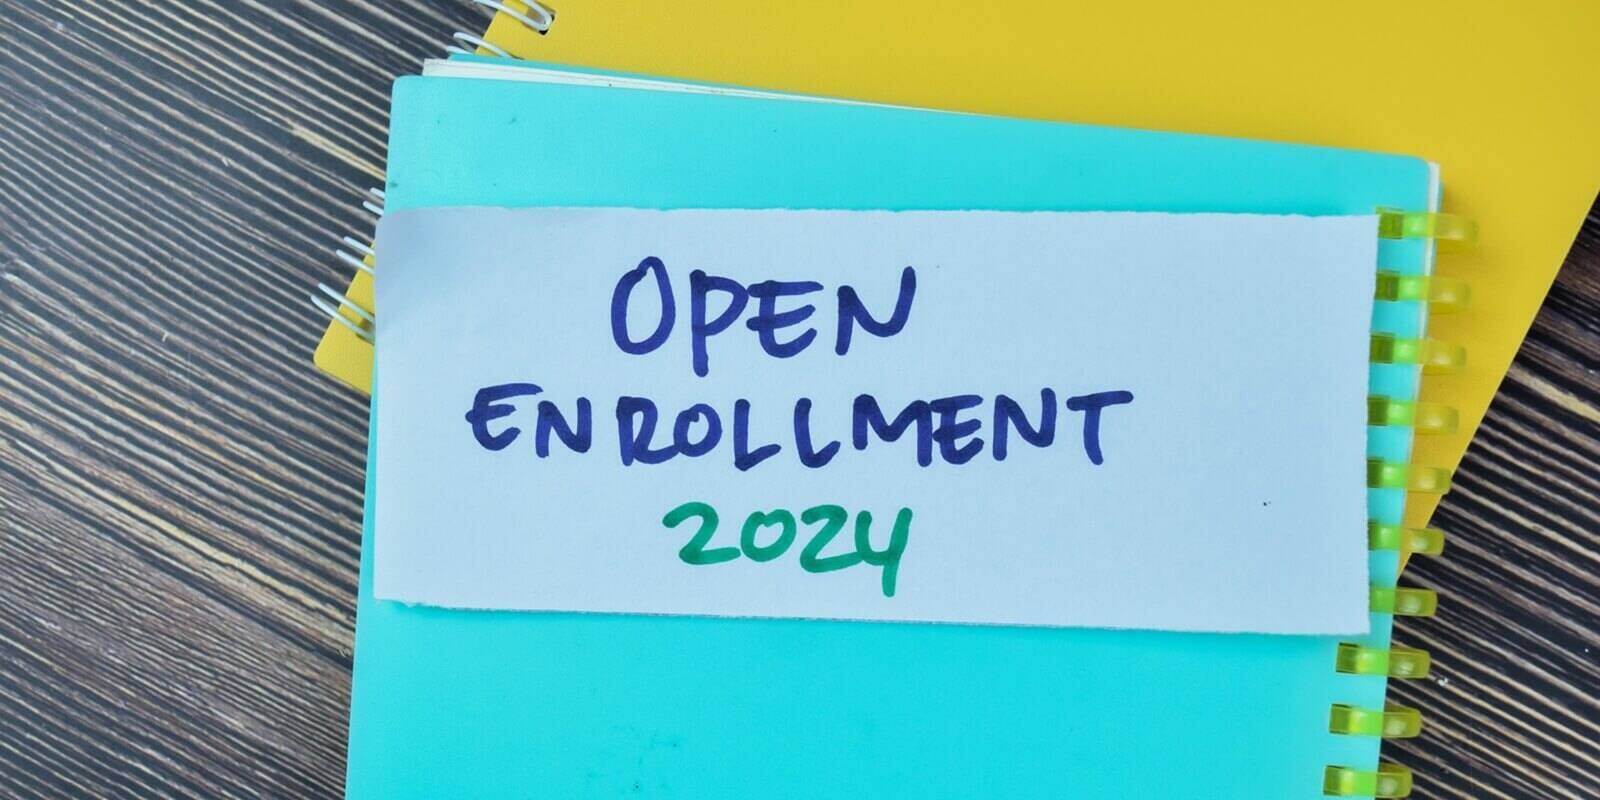 concept of open enrollment 2024 write on sticky notes isolated on wooden table